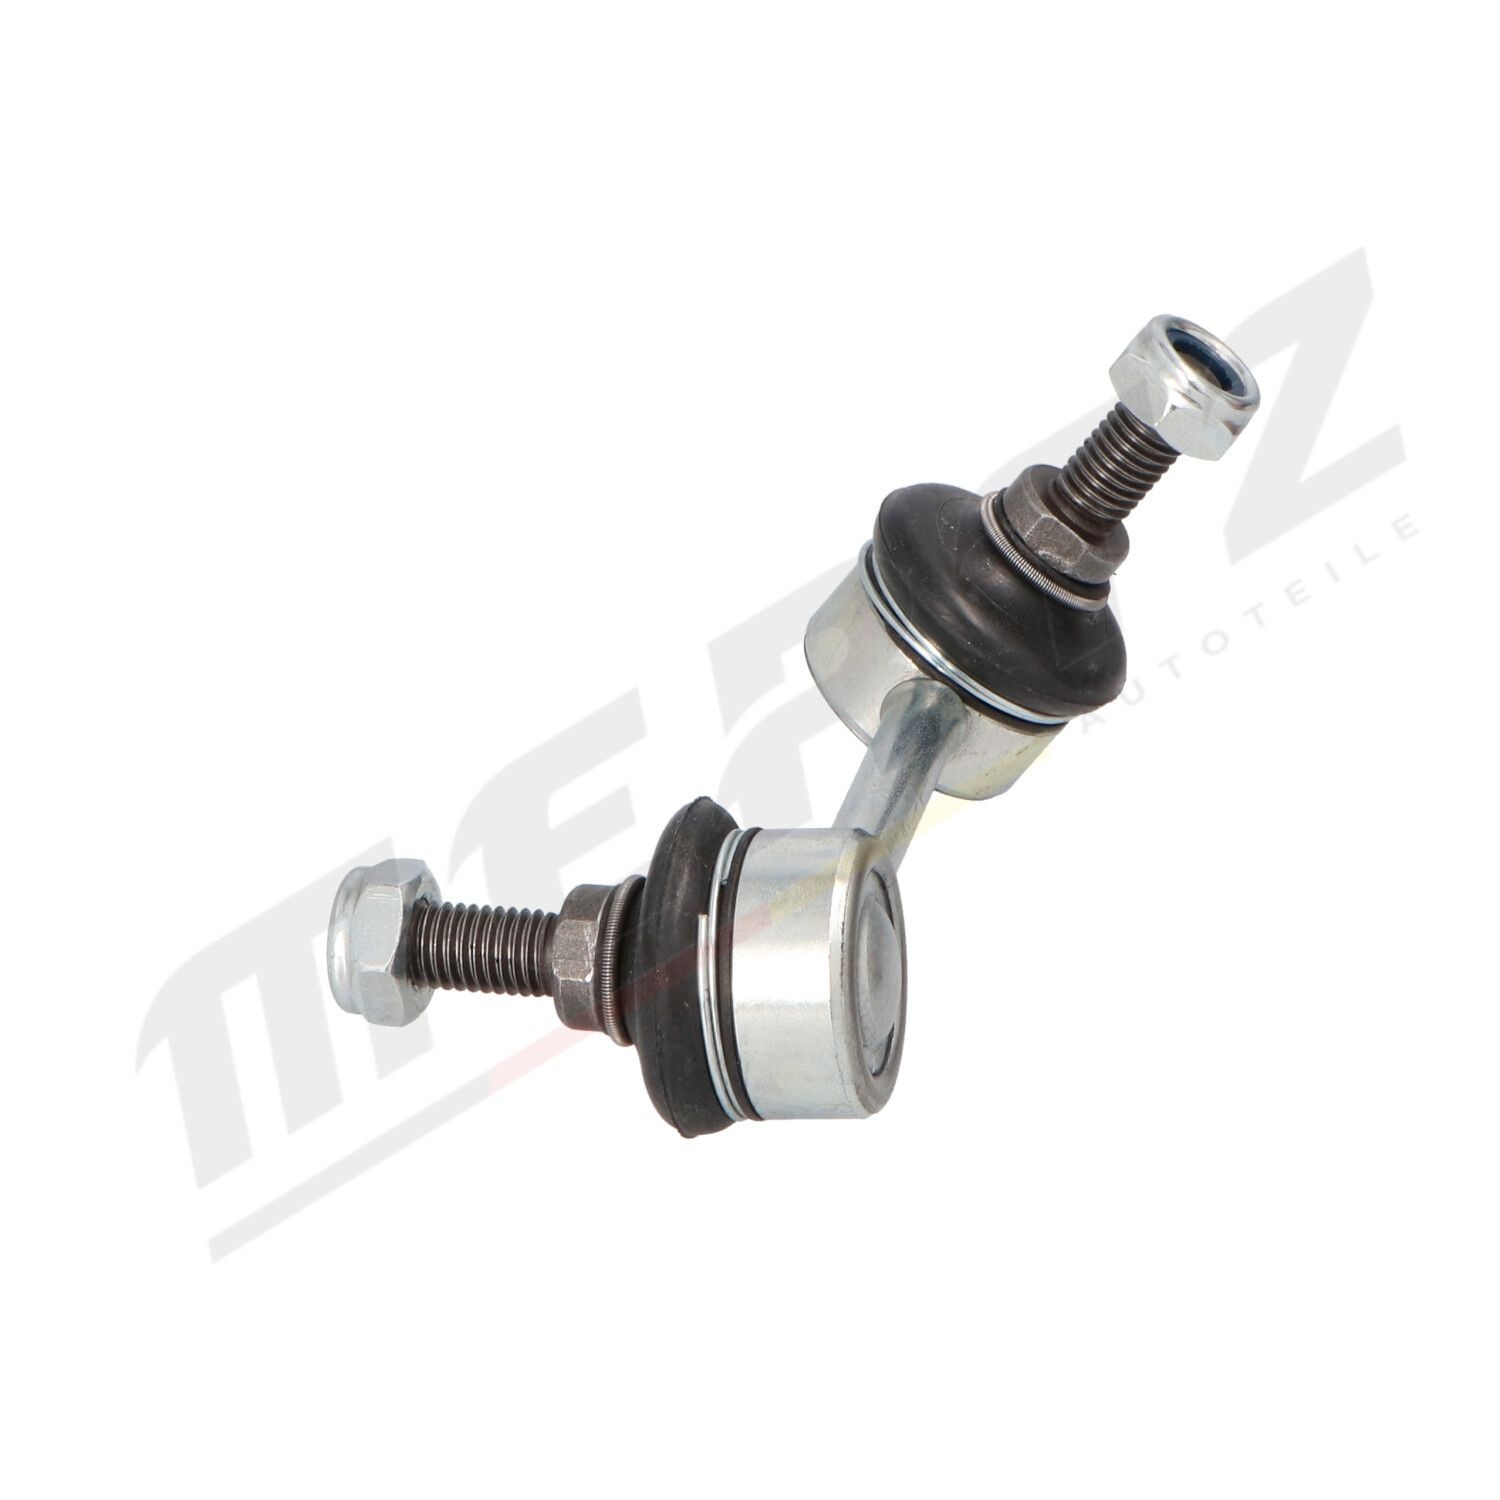 MS1760 Anti-roll bar links MERTZ M-S1760 review and test